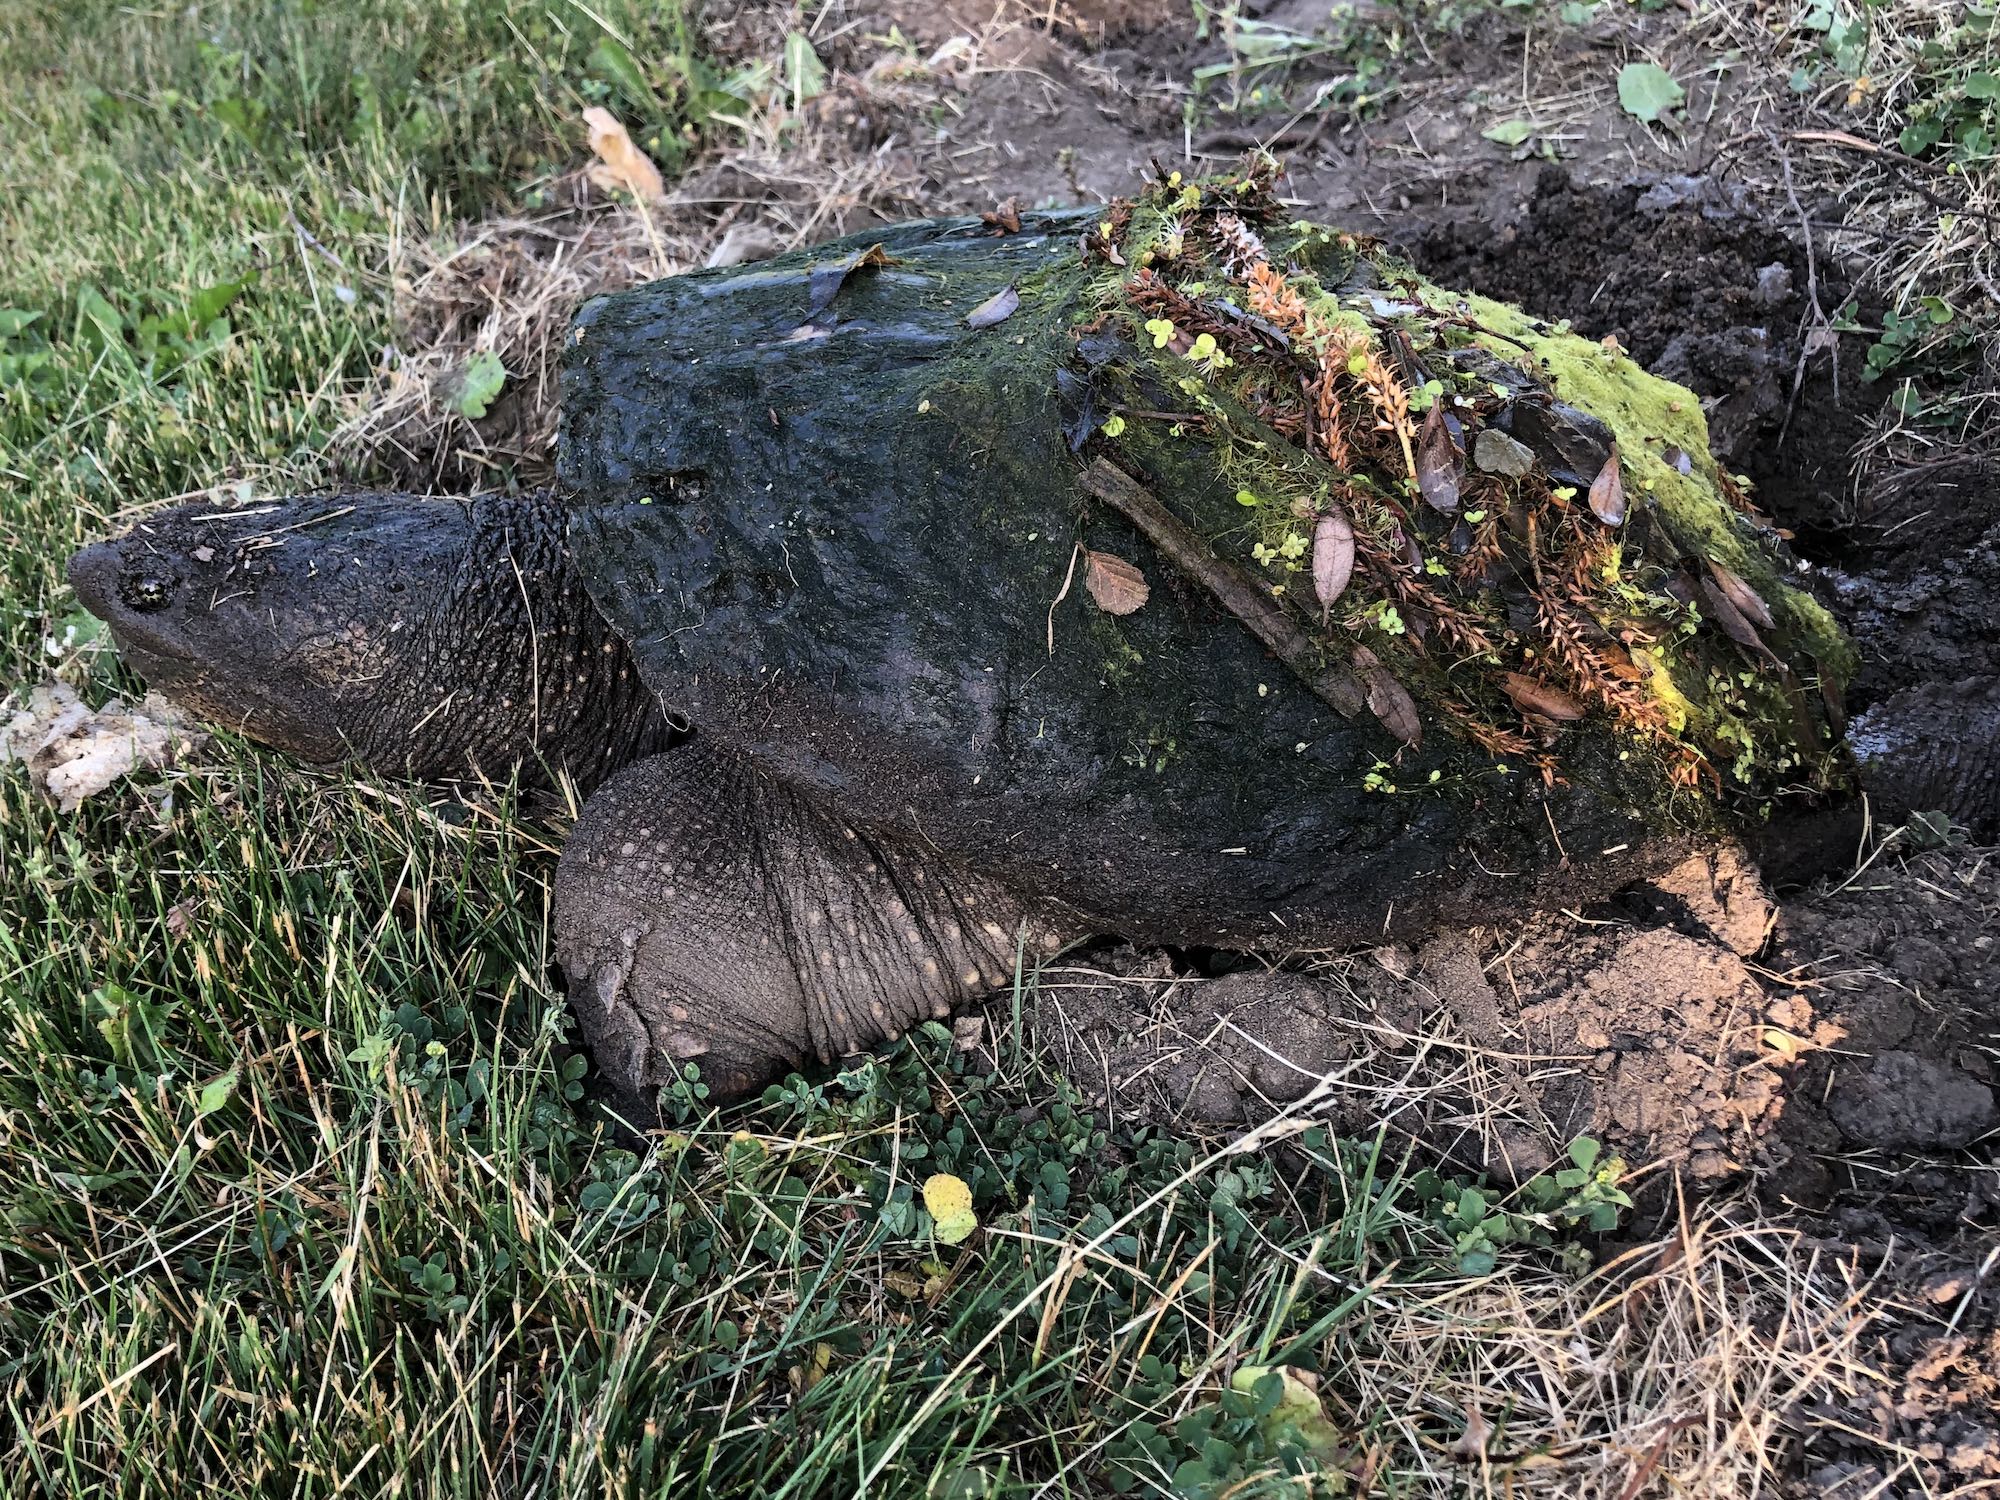 Snapping Turtle in E. Ray Stevens Pond and Aquatic Gardens on corner of Manitou Way and Nakoma Road in Madison, Wisconsin on June 9, 2021.